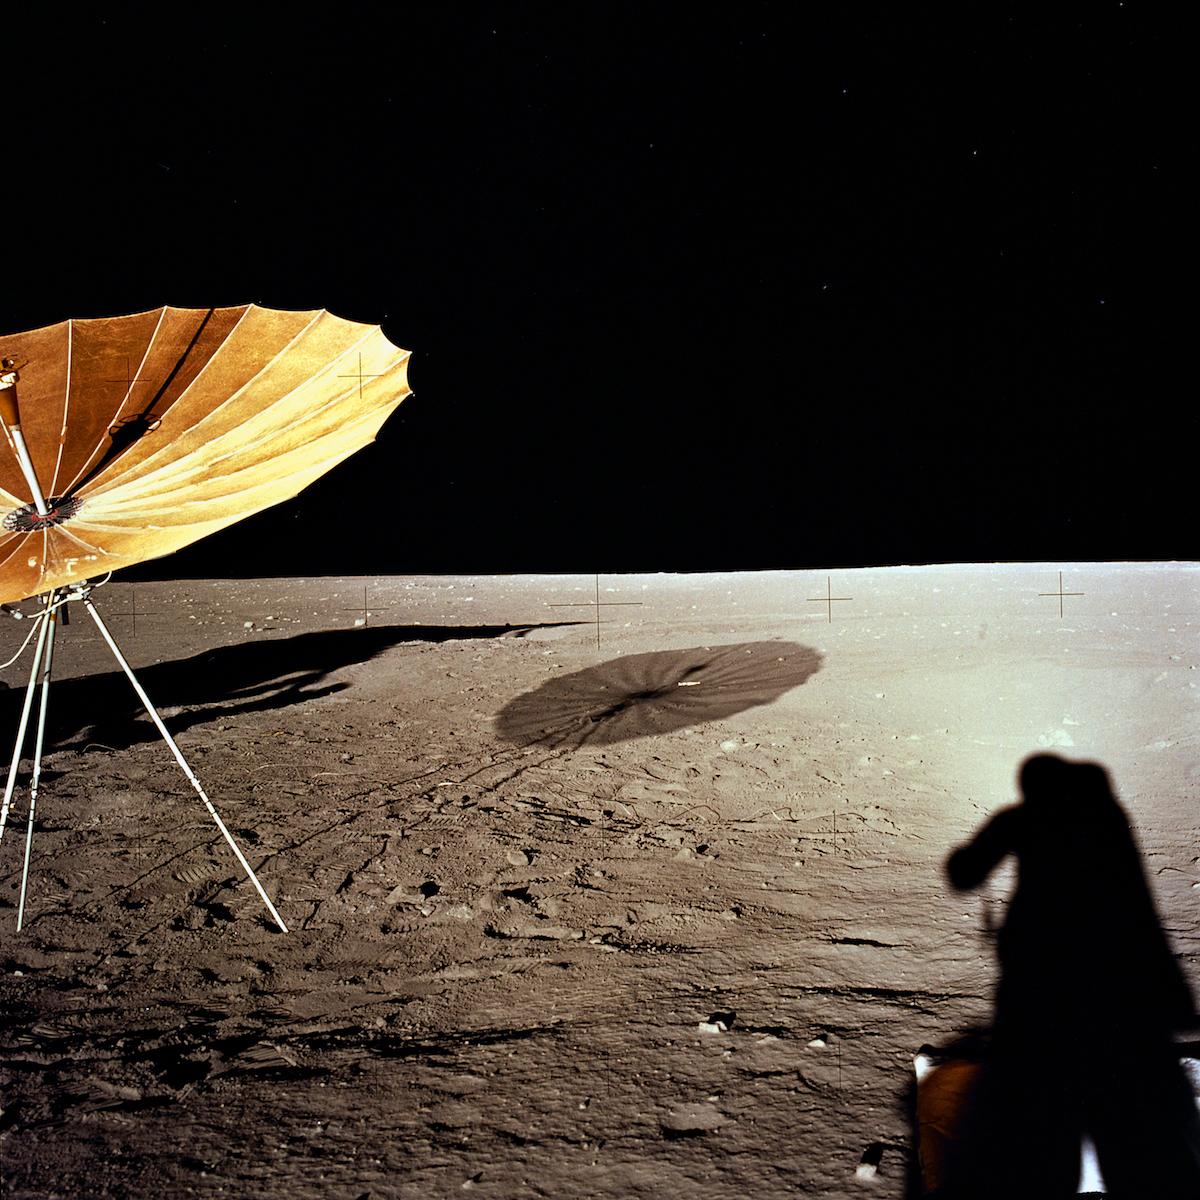 an antenna deployed on the Moon's surface, resembling an inverted golden umbrella, with an astronaut's shadow in the foreground